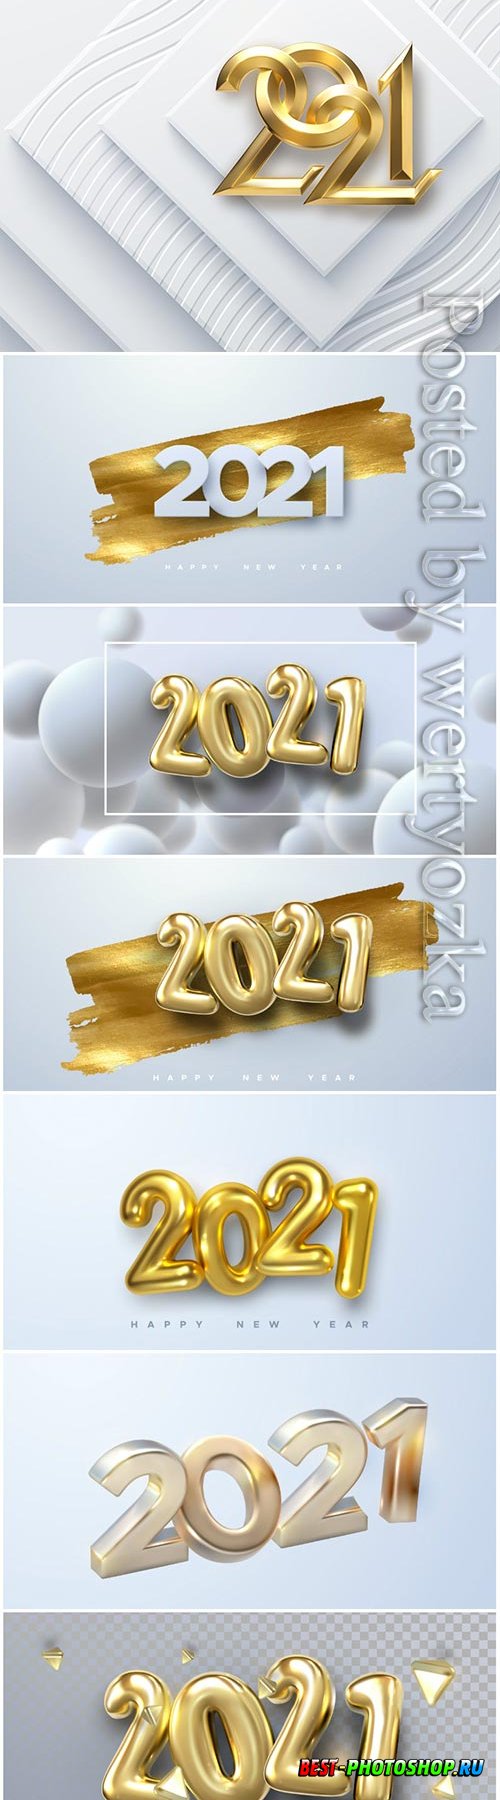 Elegant numbers 2021 for new year vector illustration